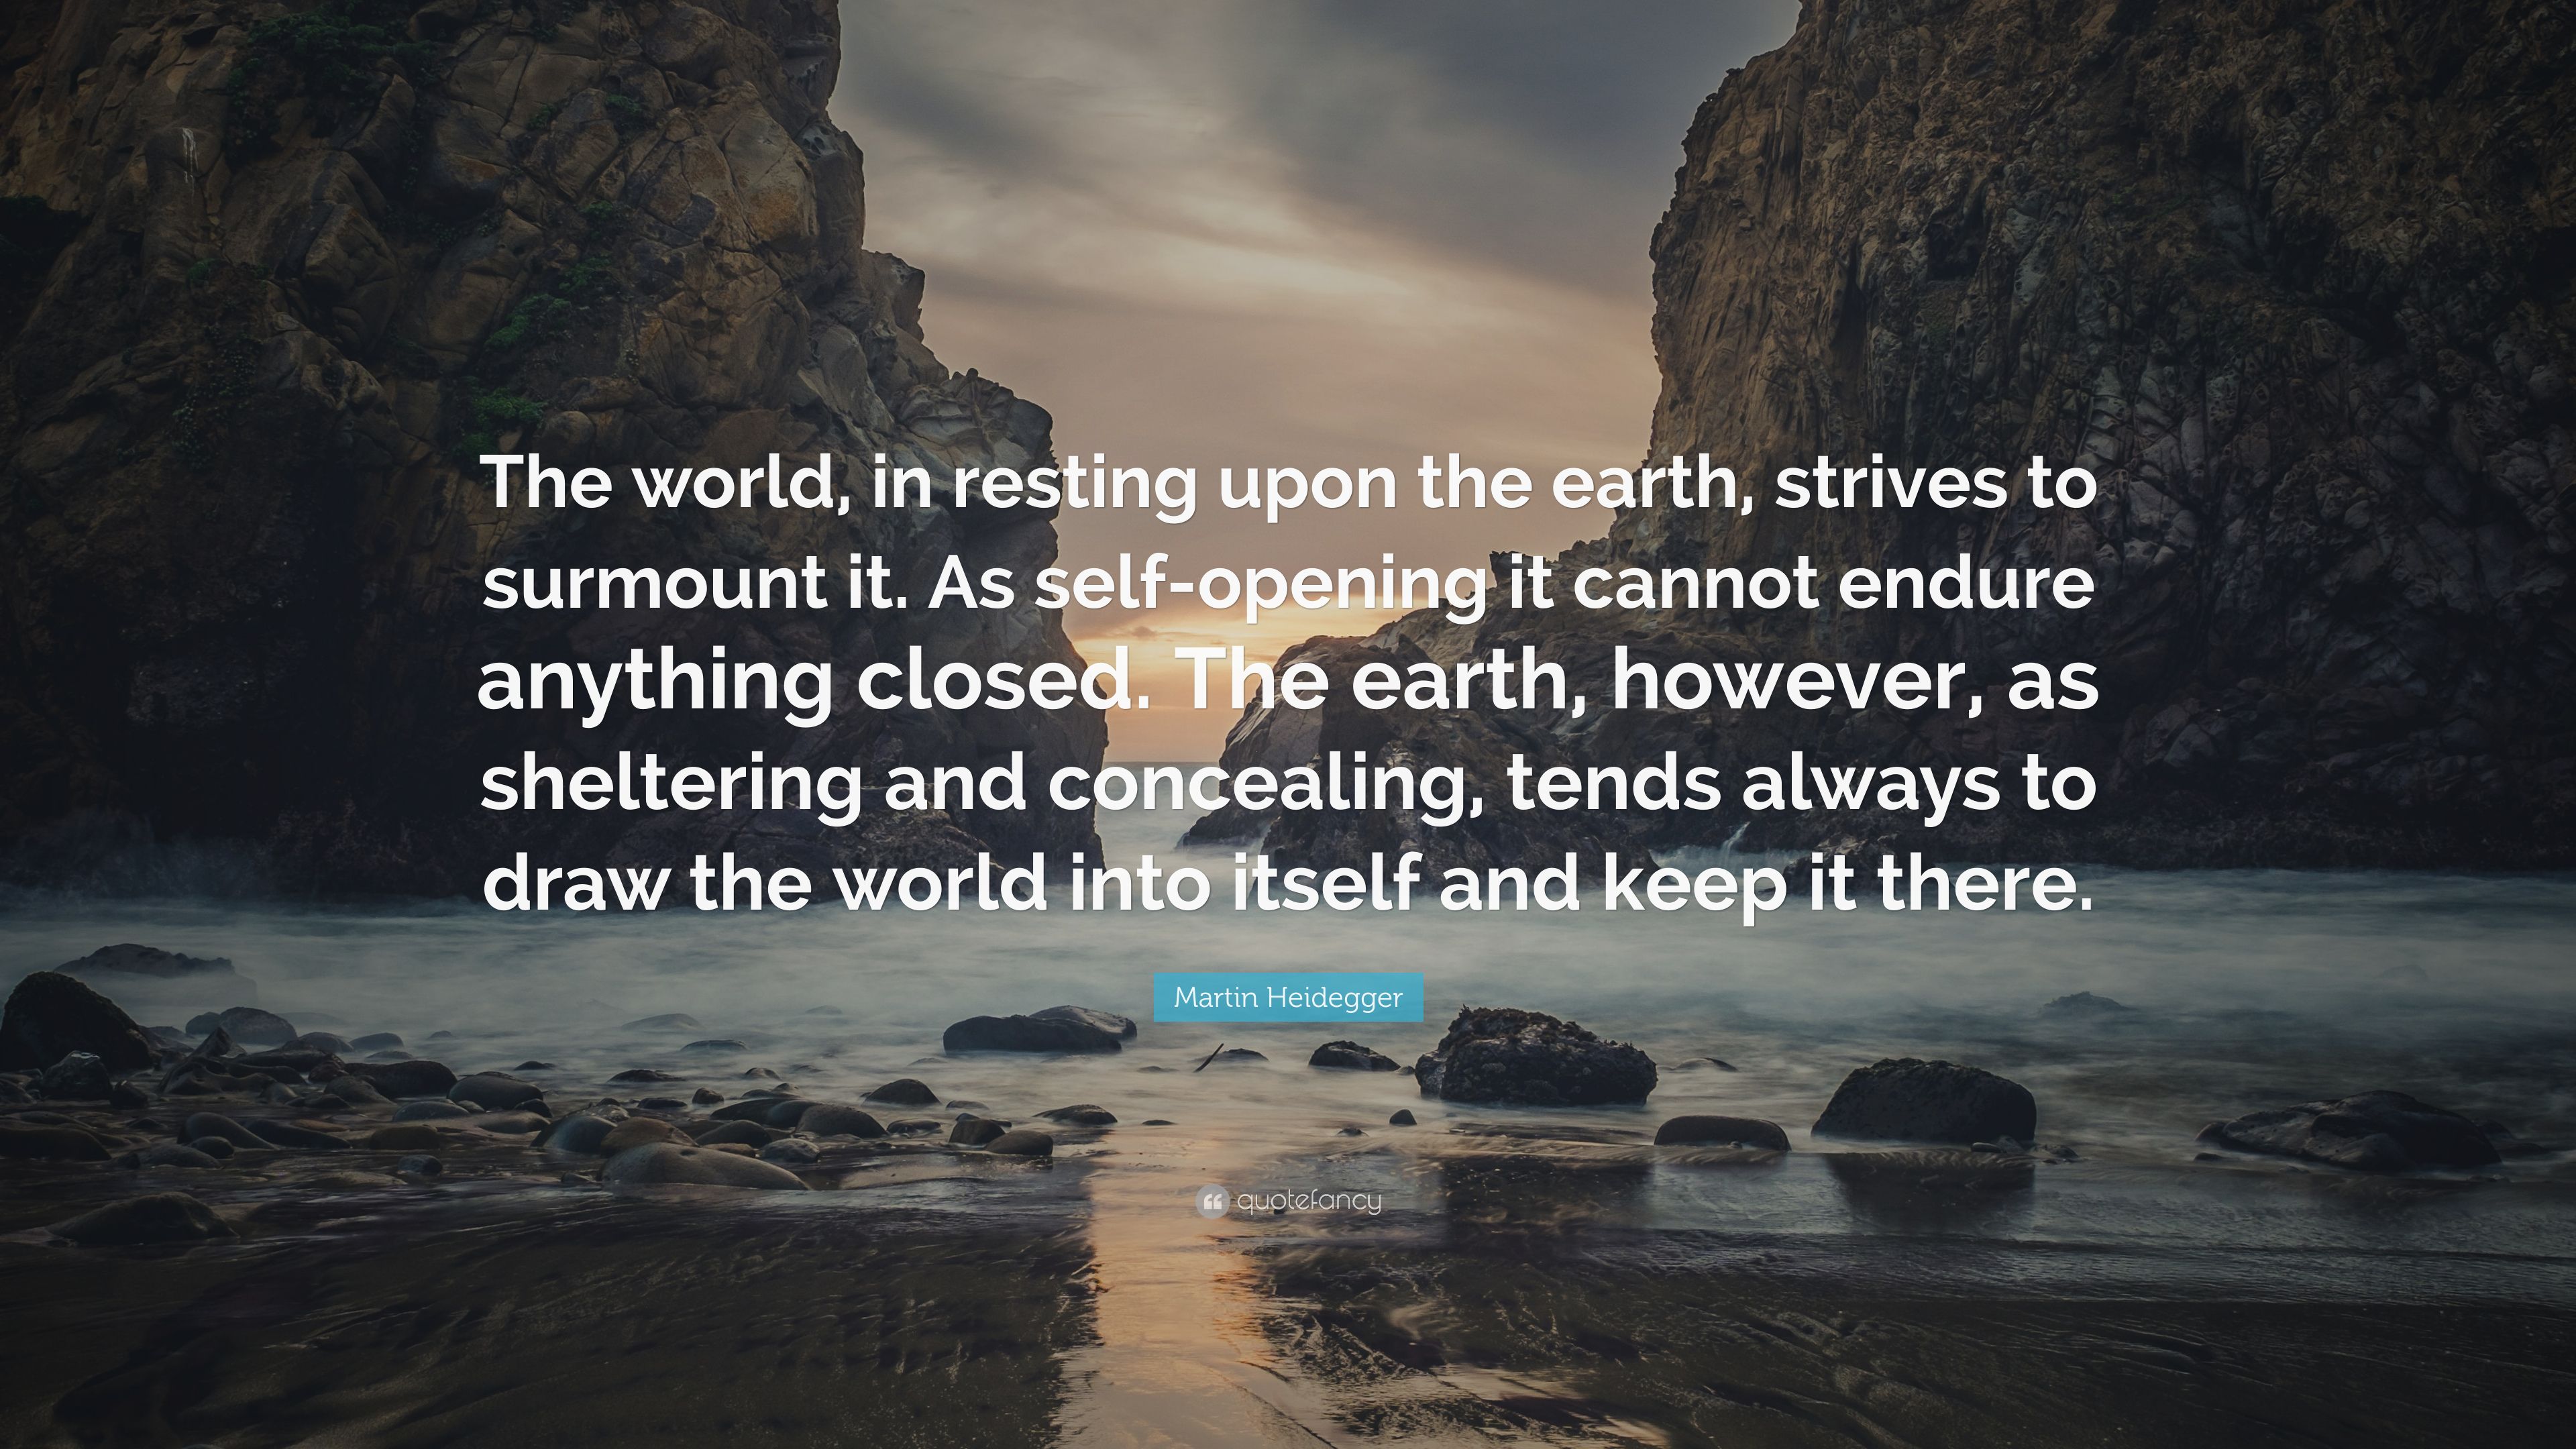 Martin Heidegger Quote: "The world, in resting upon the earth.